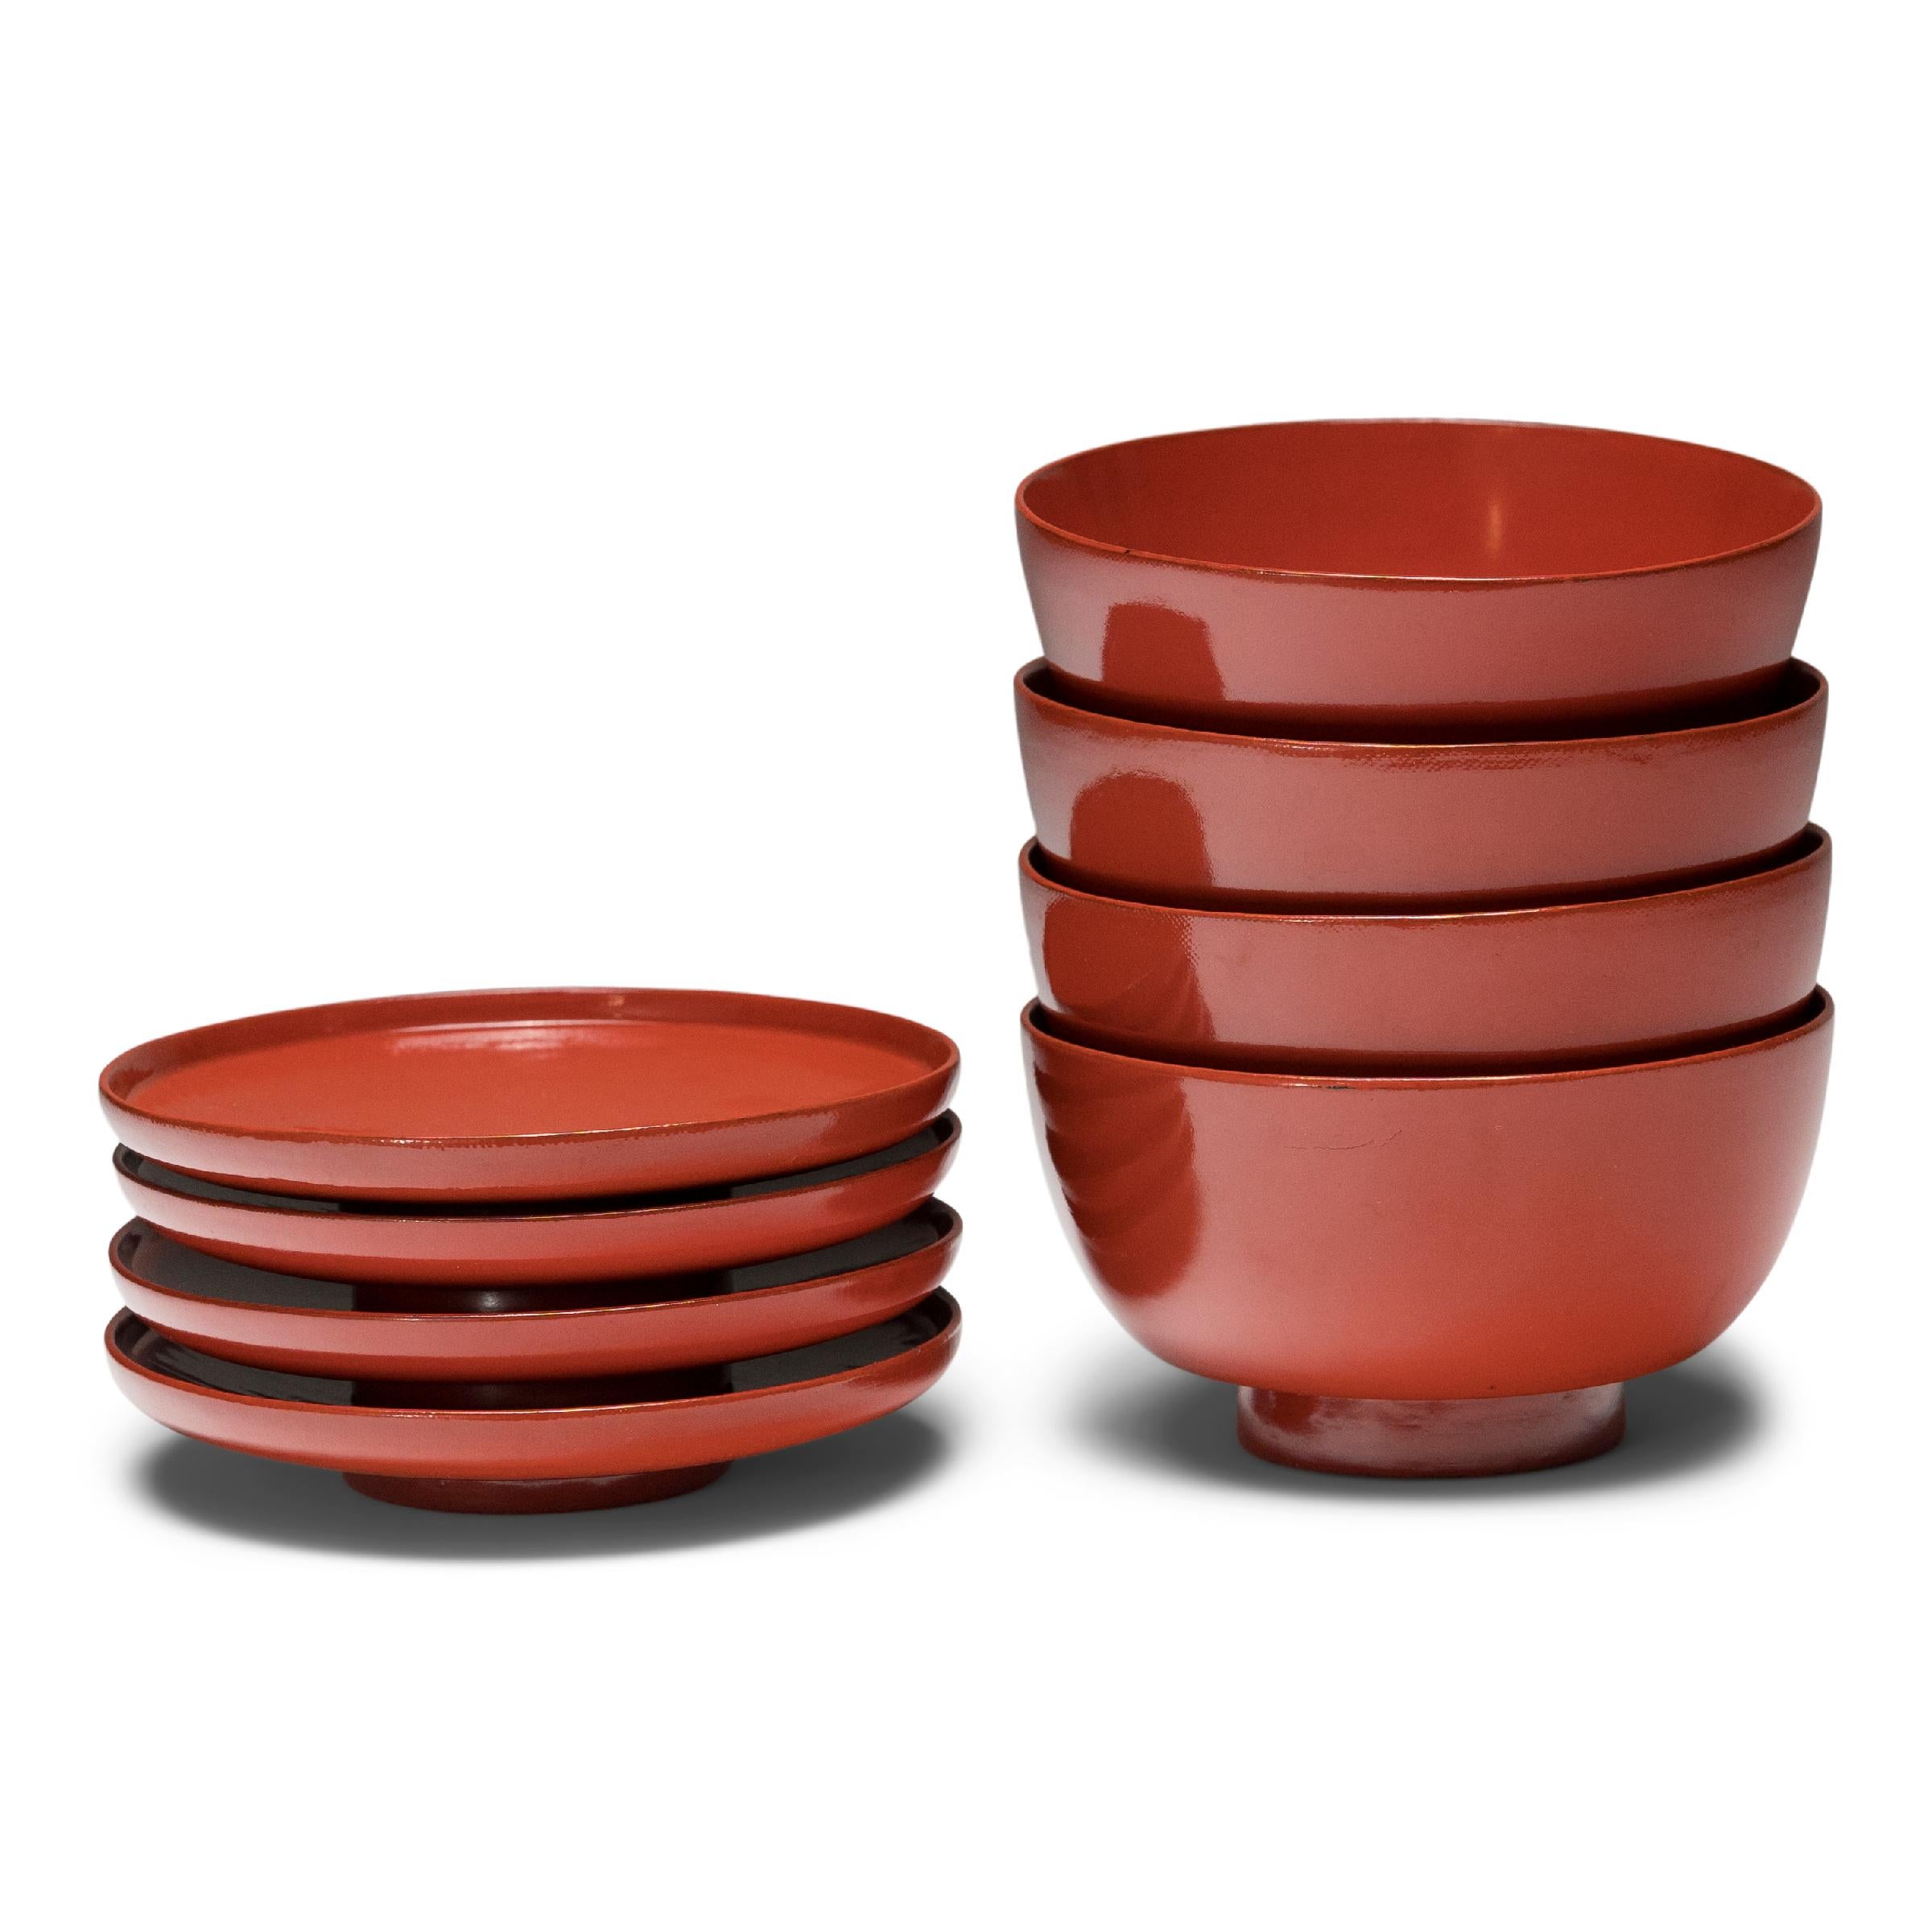 This set of four lacquered rice bowls is simply shaped with gently tapered sides and a footed base, accompanied by matching footed lids. A rich, glossy red finish coats the bowls and lids inside and out, with a contrasting black lacquer detailing on